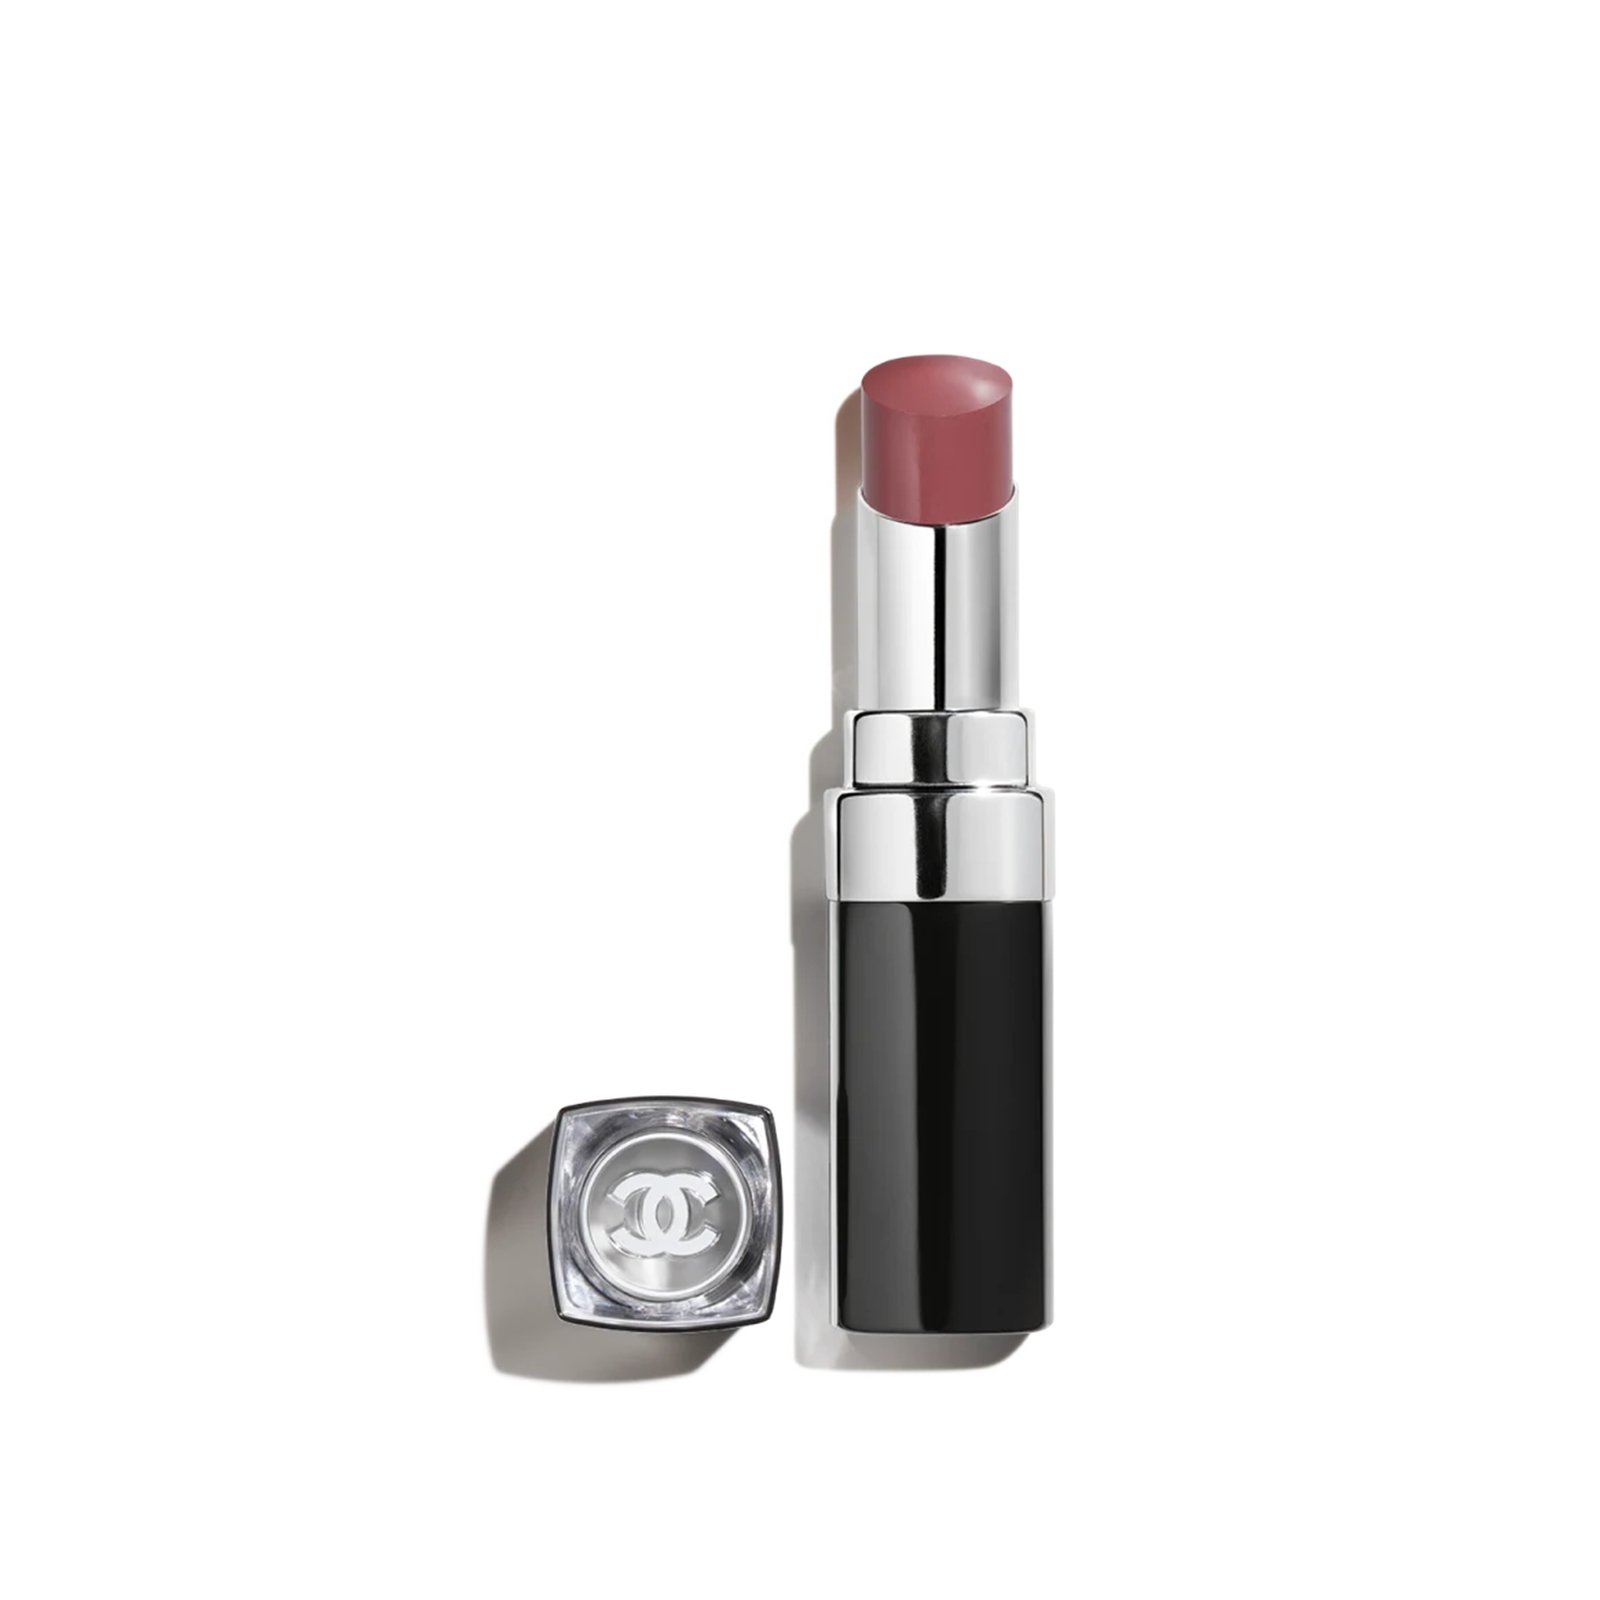 CHANEL Rouge Coco Bloom Intense Shine Lip Colour 118 Radiant 3g